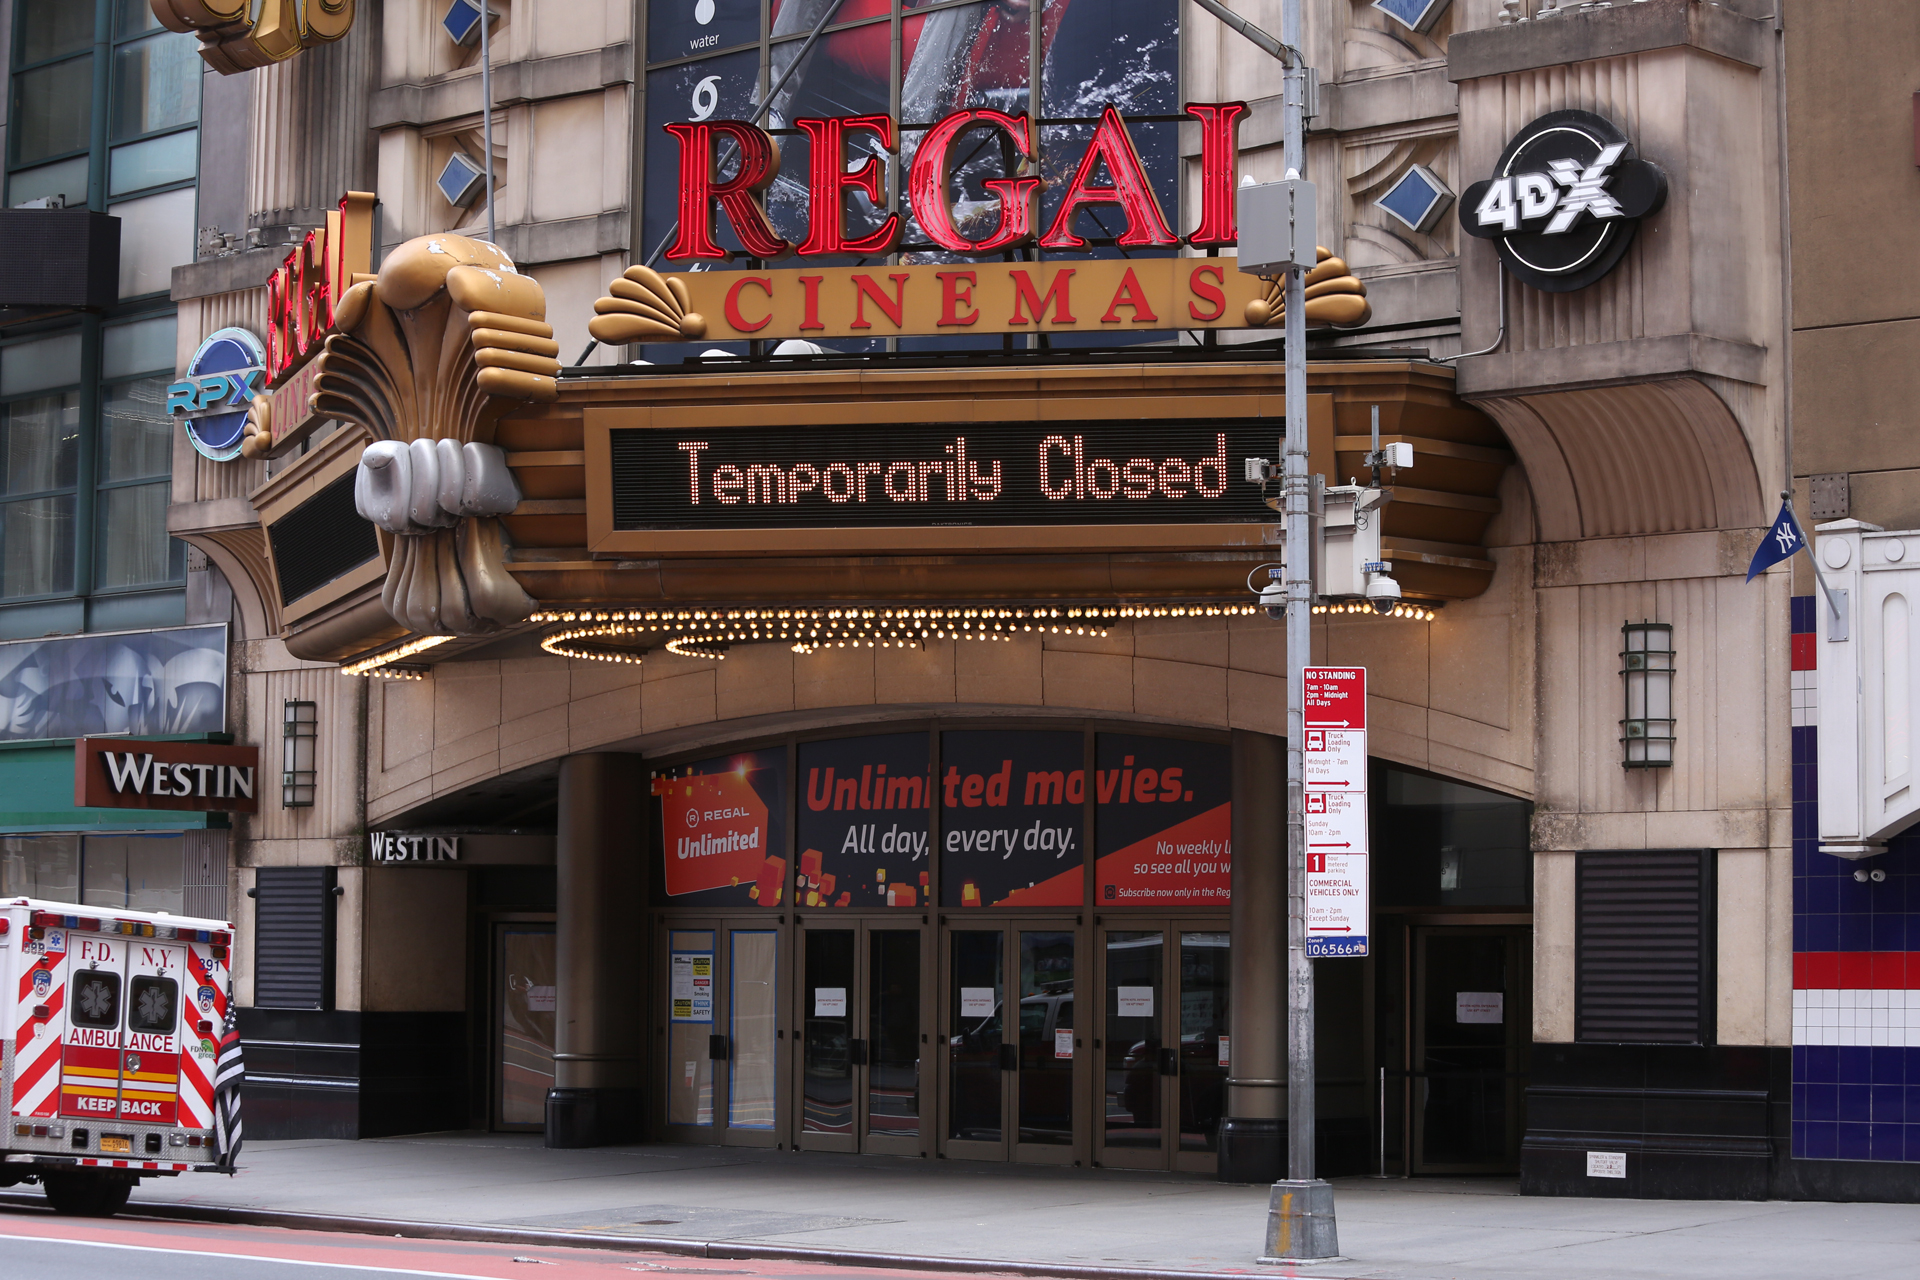 A Regal Cinemas remains closed during the coronavirus pandemic in New York City